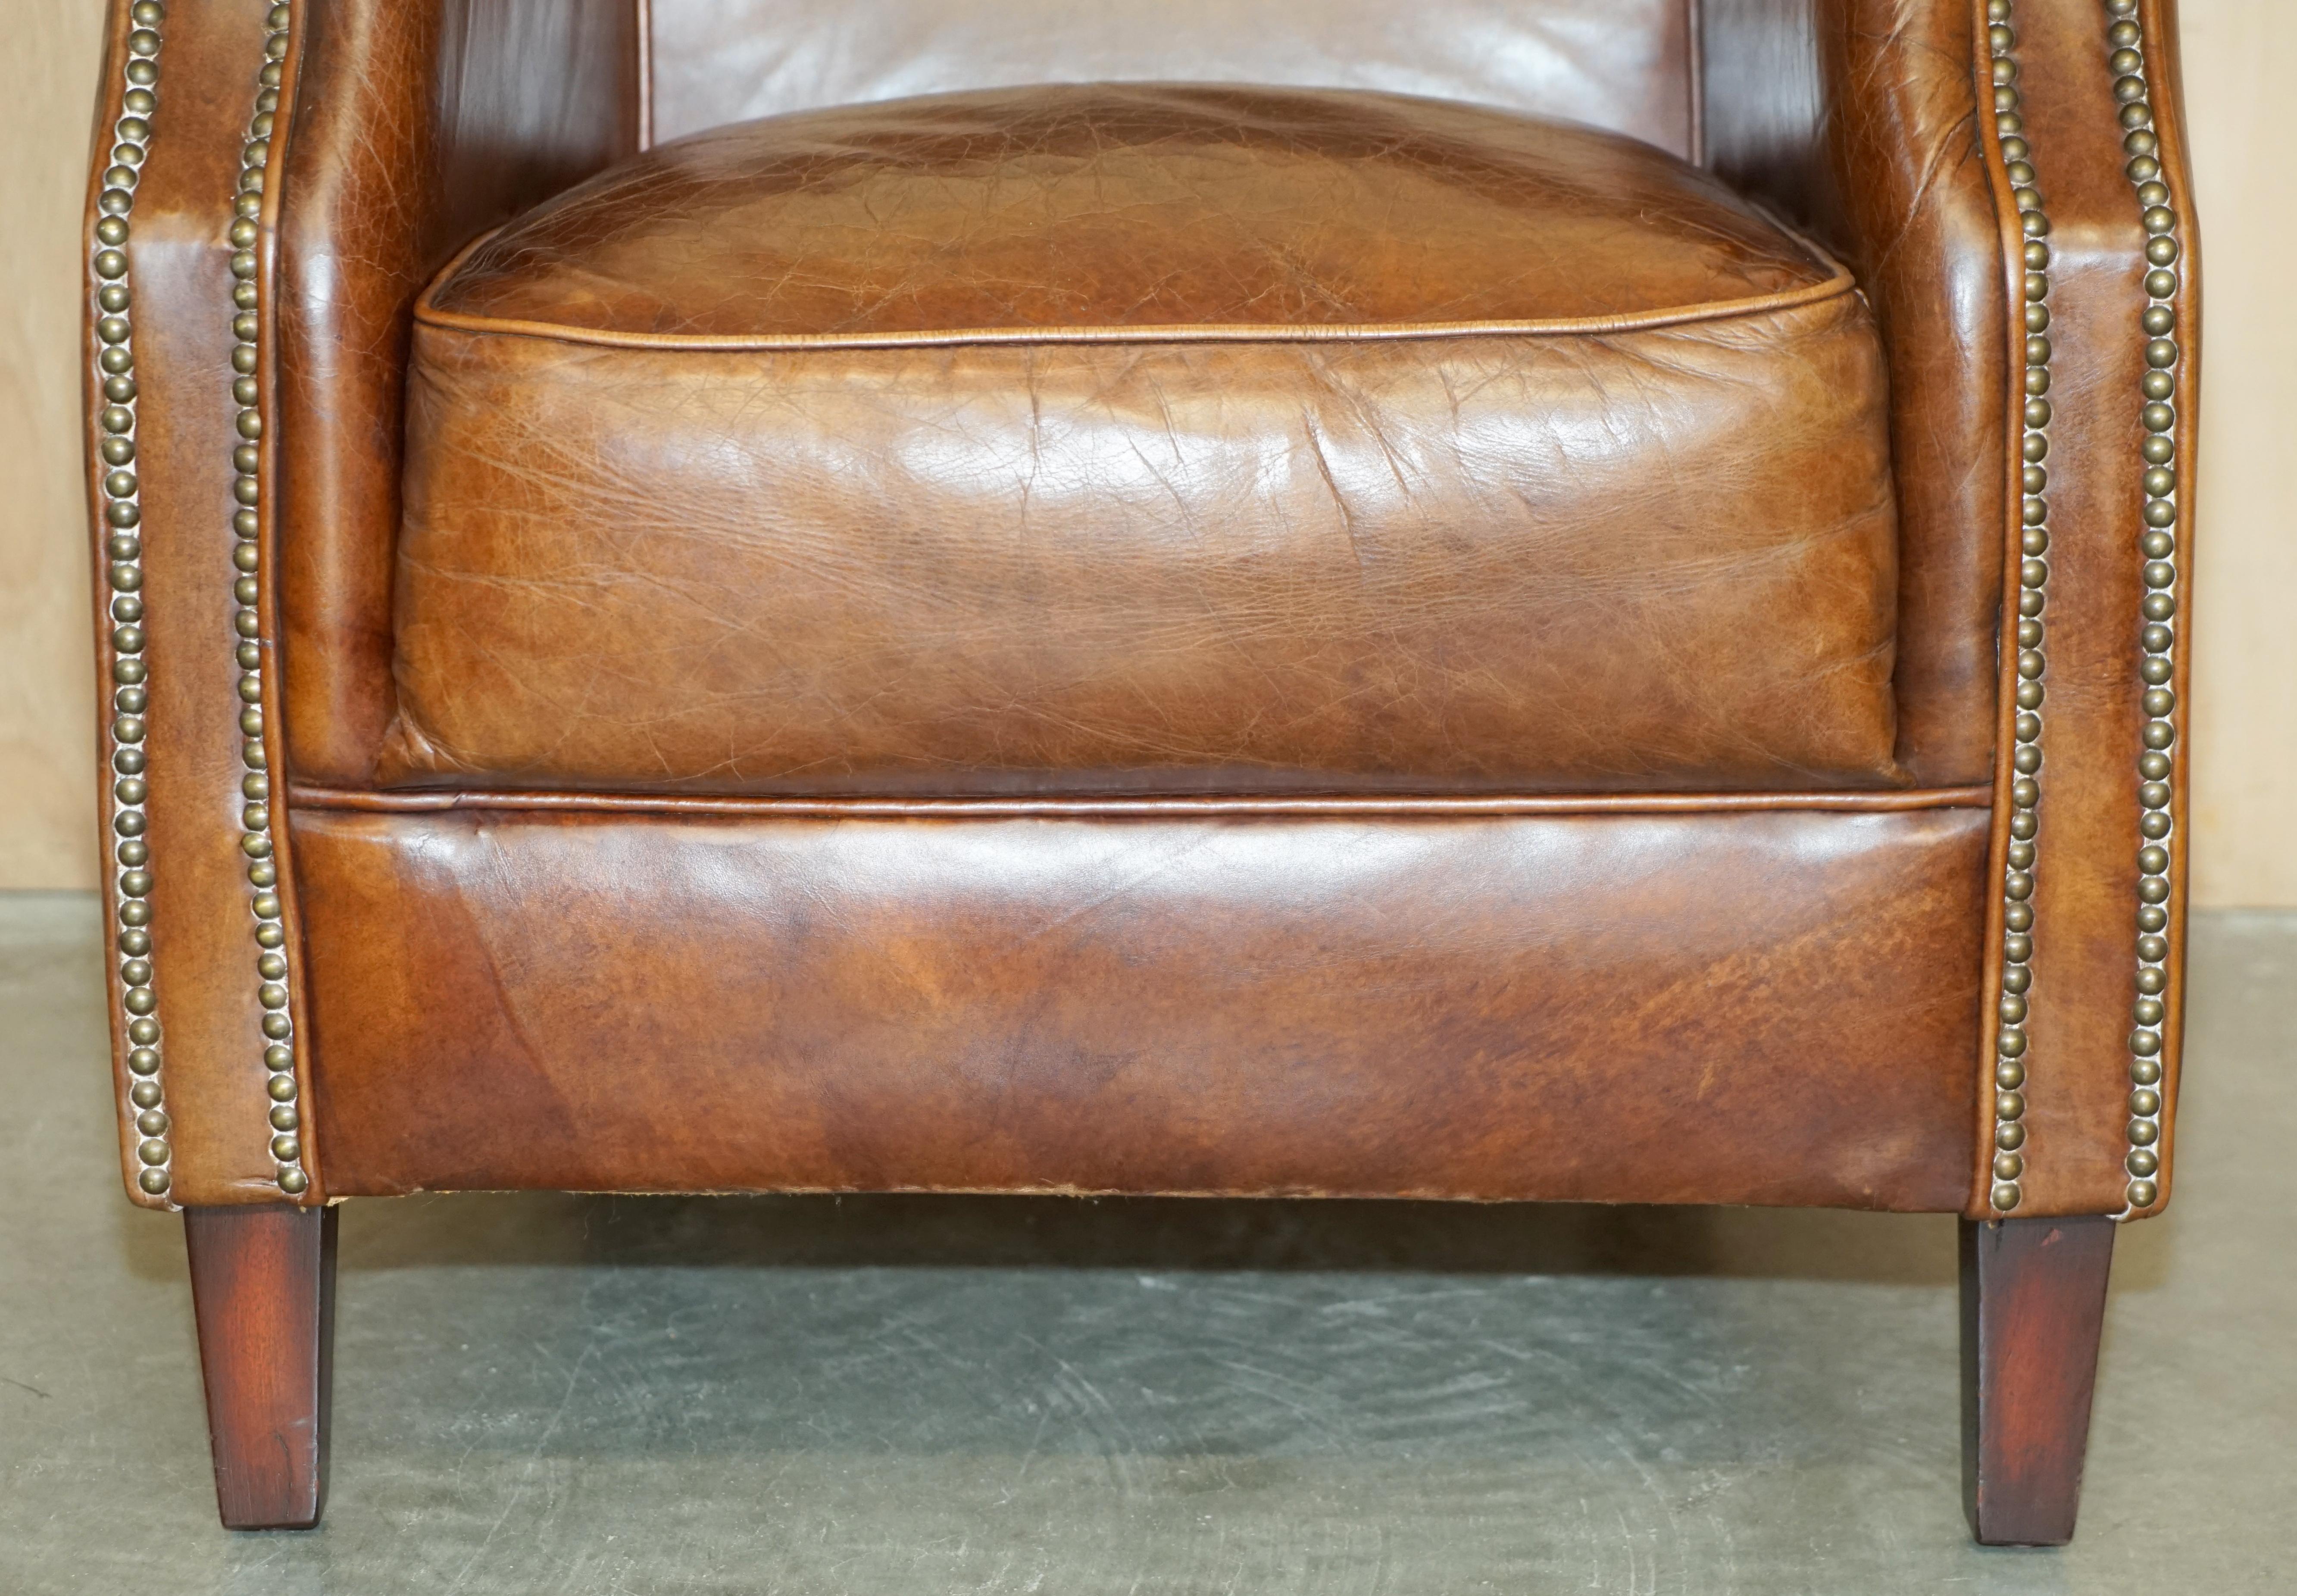 20th Century AGED HERiTAGE BROWN LEATHER BIKER TAN CLUB TUB ARMCHAIR MUST SEE LOVELY PATINa!! For Sale